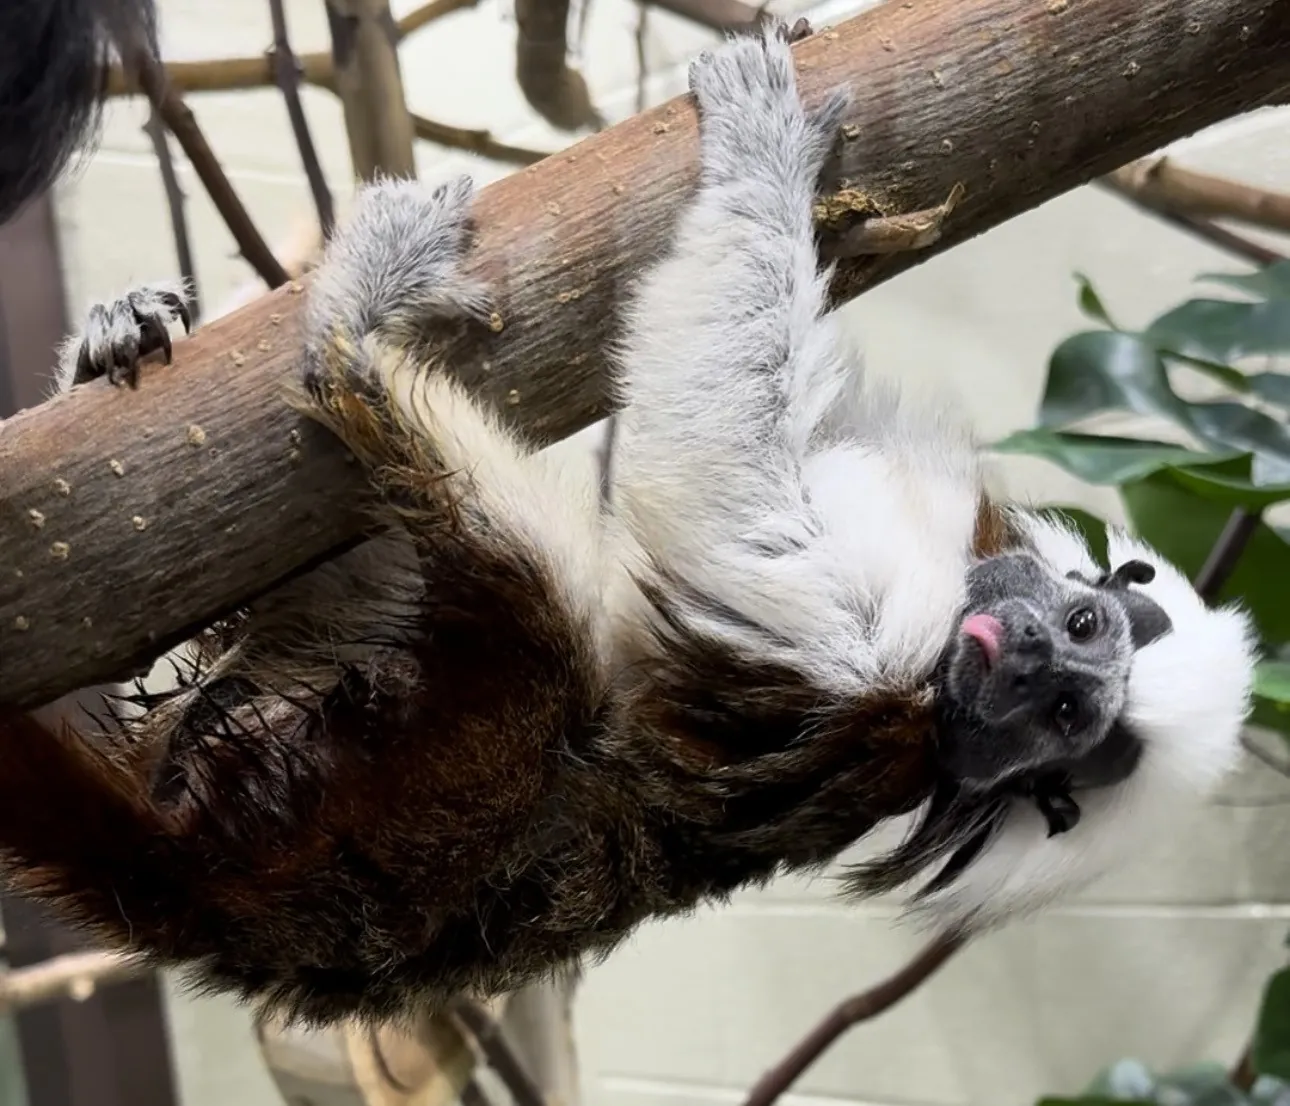 Cotton-top tamarin upside down hanging from a branch